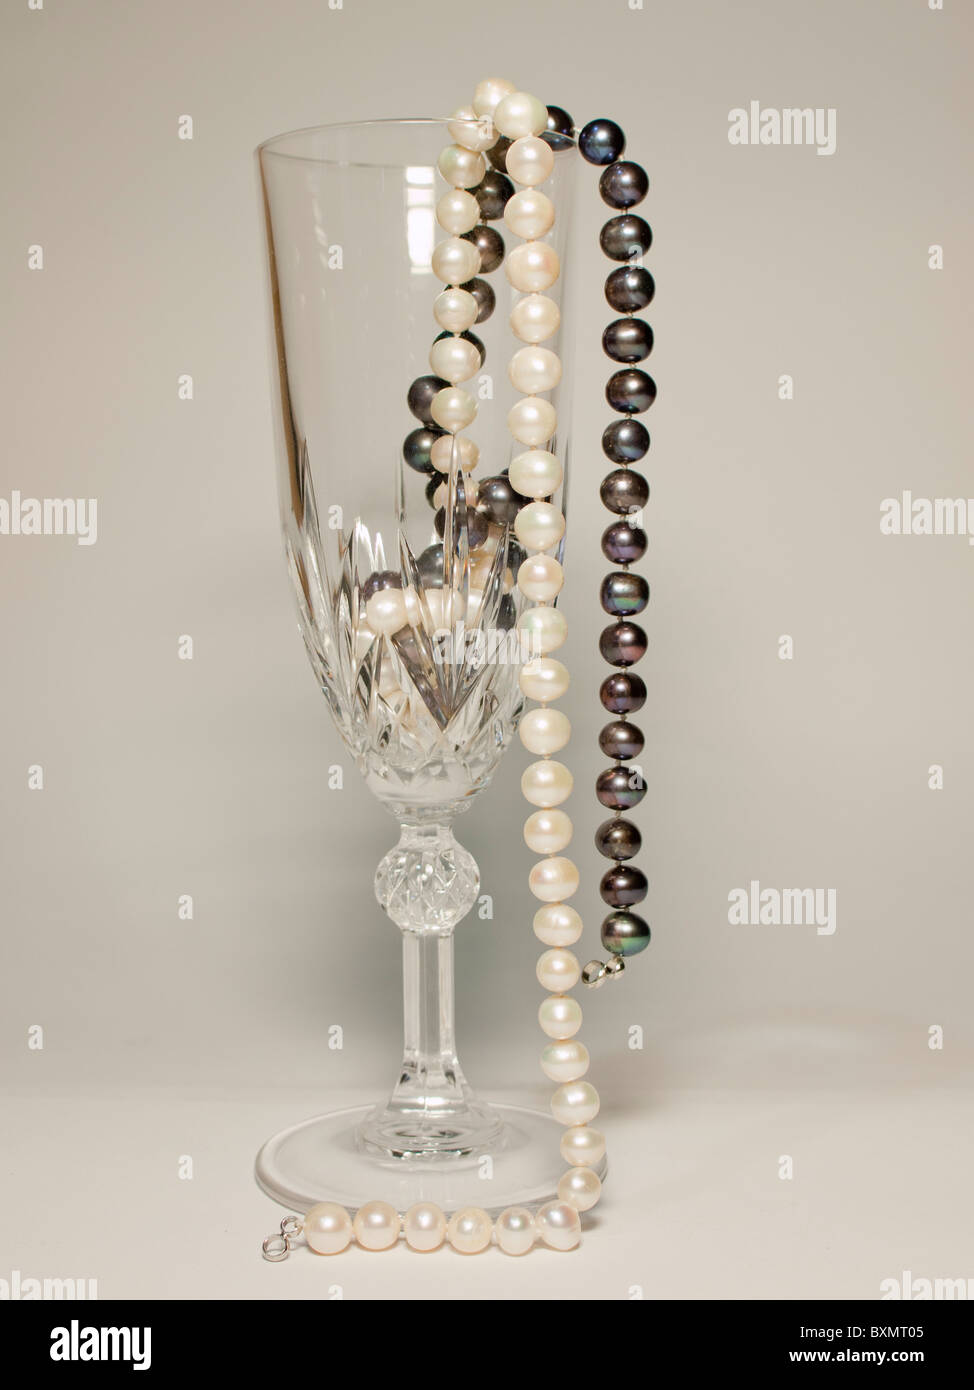 black and white pearl necklace inside standing champagne glass Stock Photo